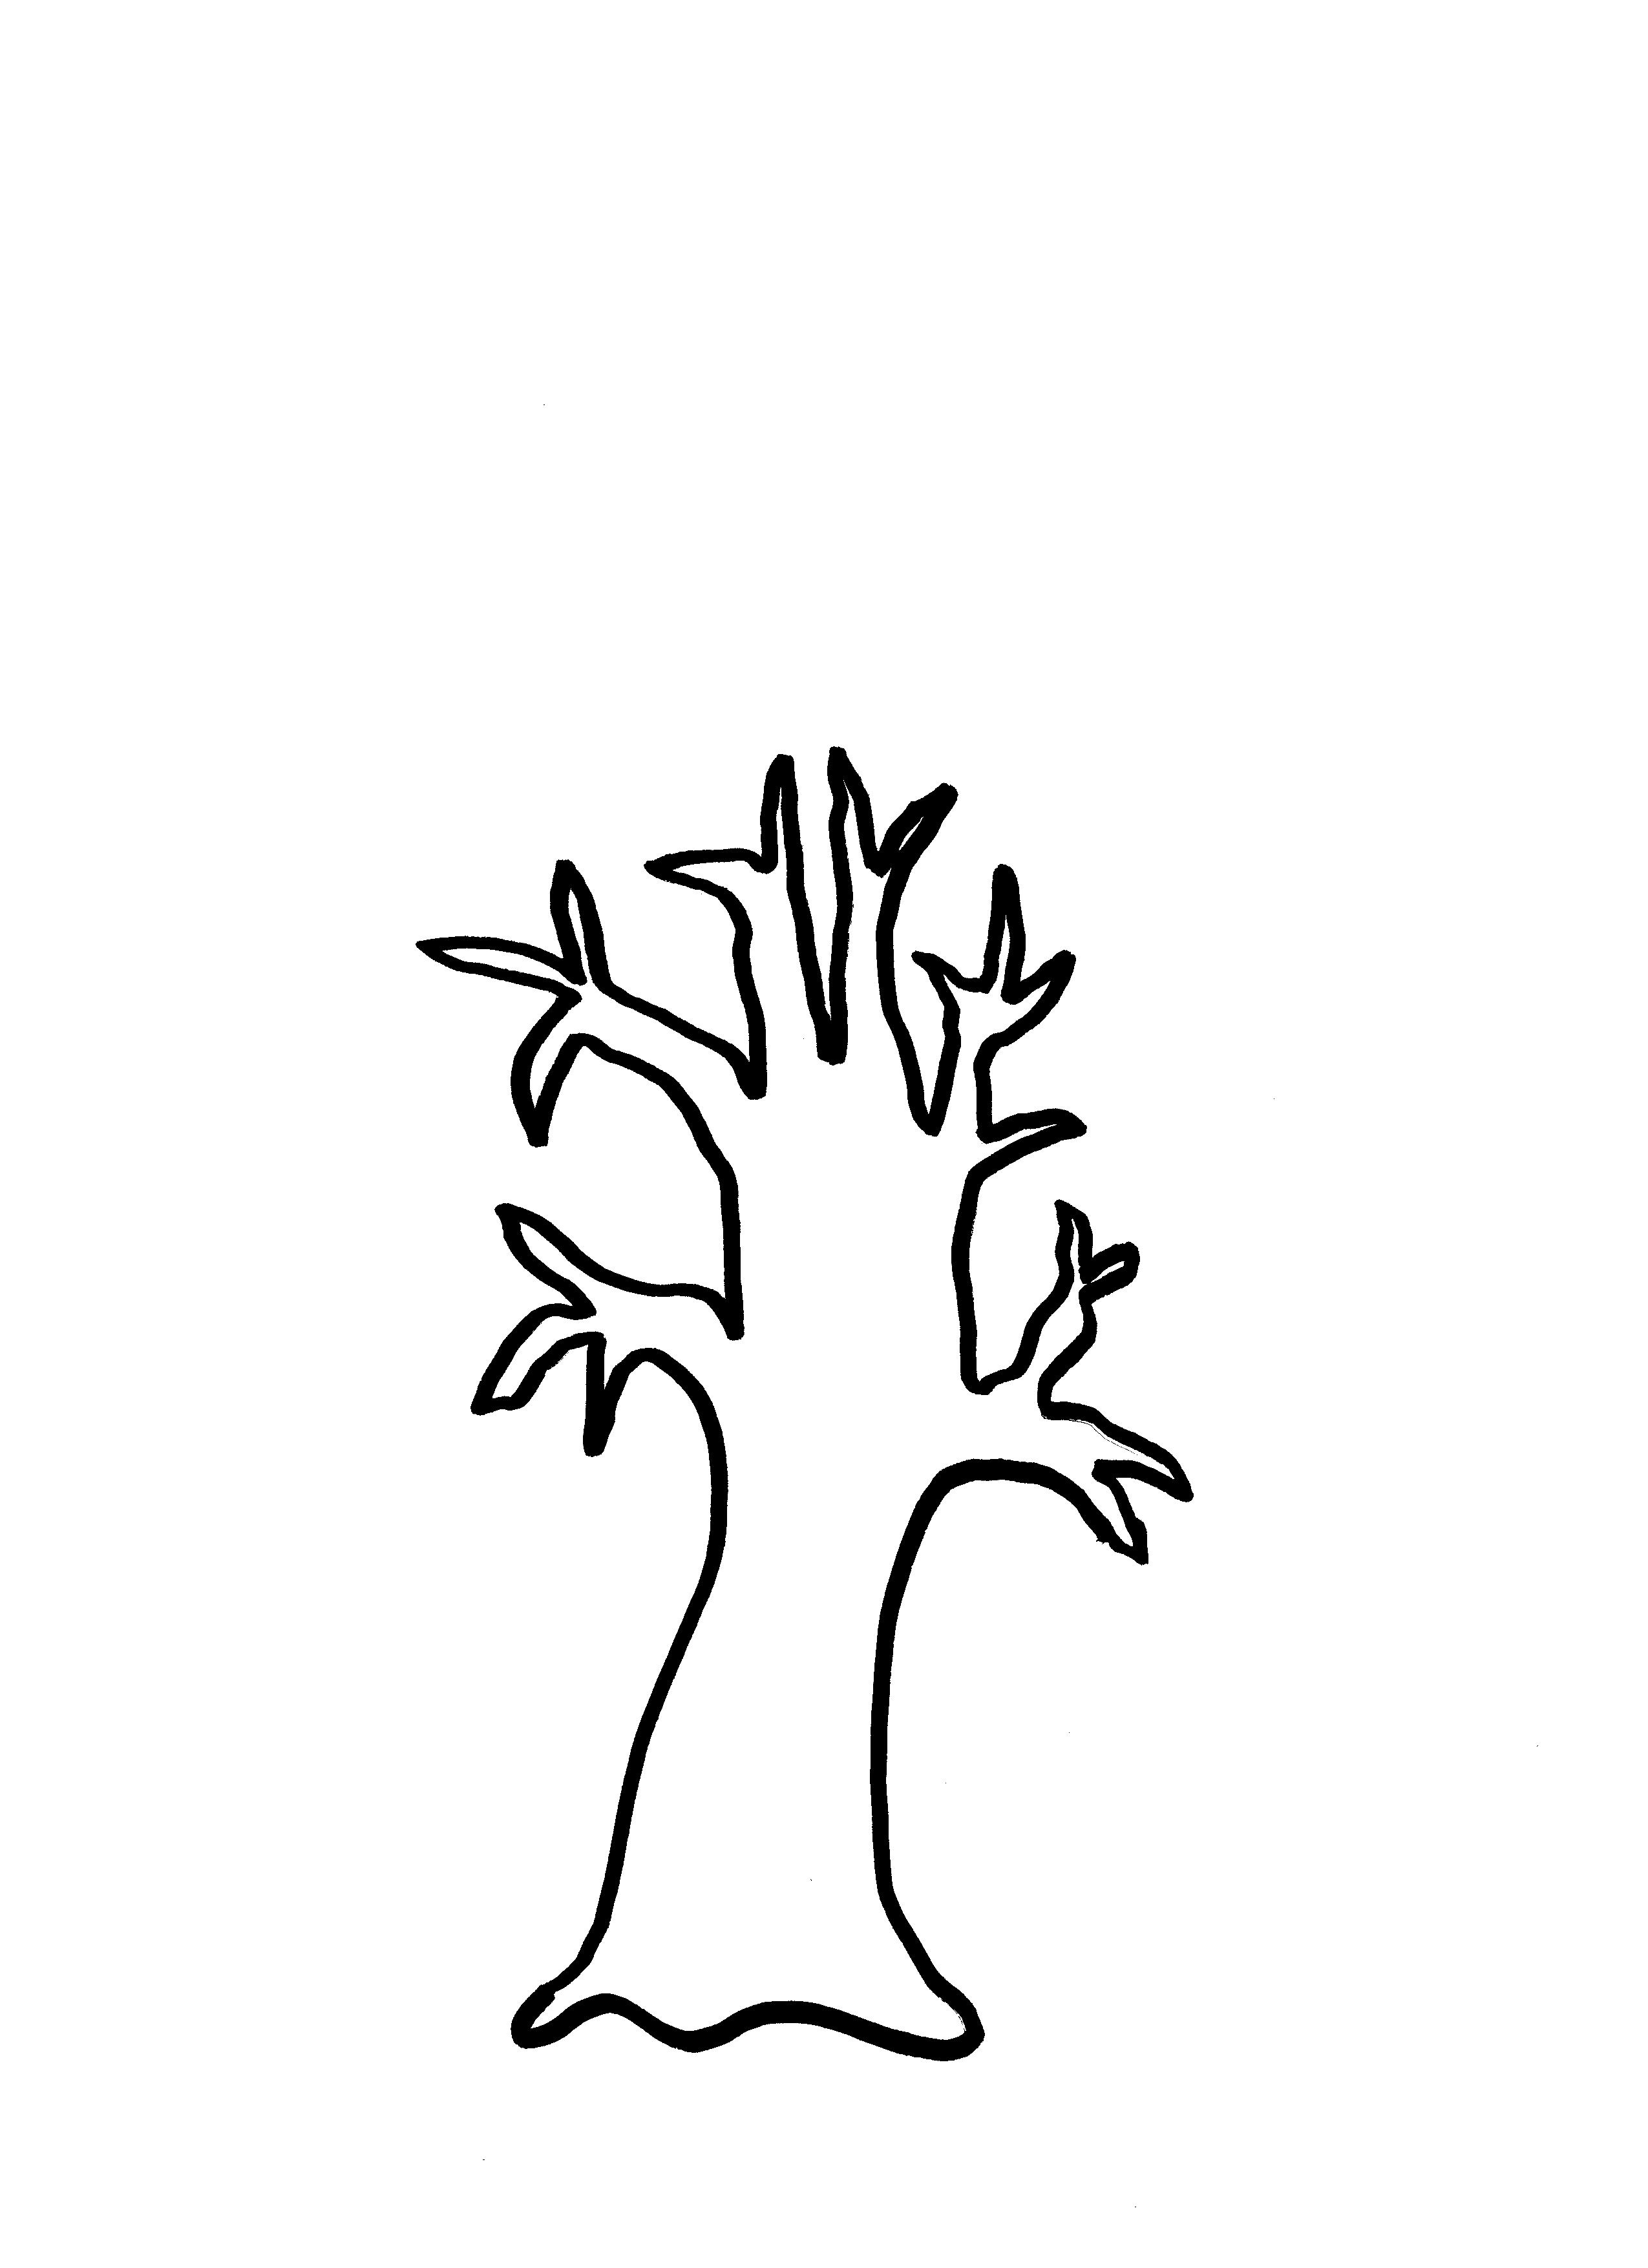 Tree Trunk Outline